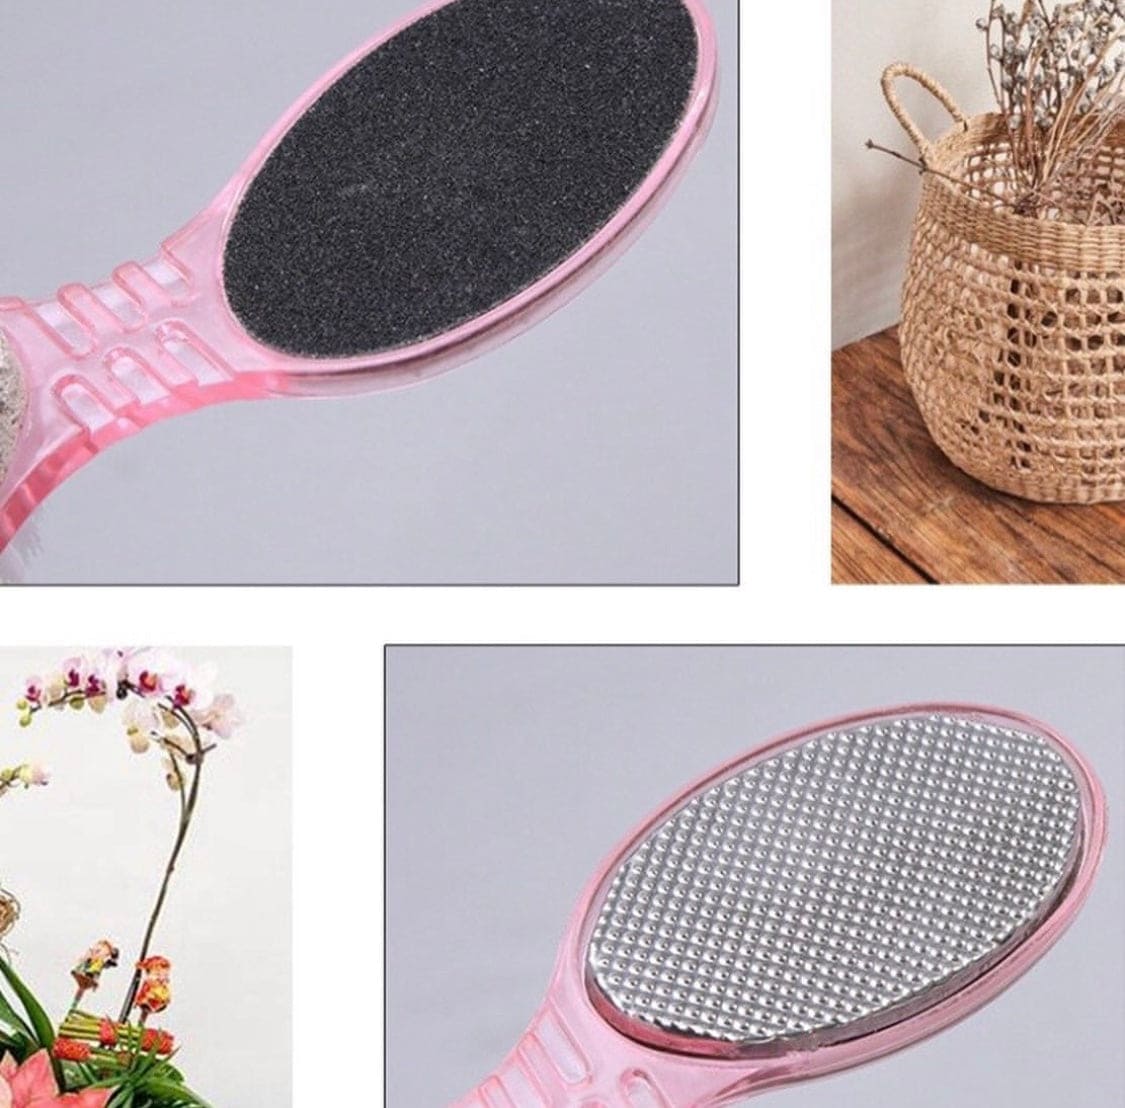 4 In 1 Foot Care Callus Brush, Grinding Feet Stone Scrubber, Feet Health Foot Tool